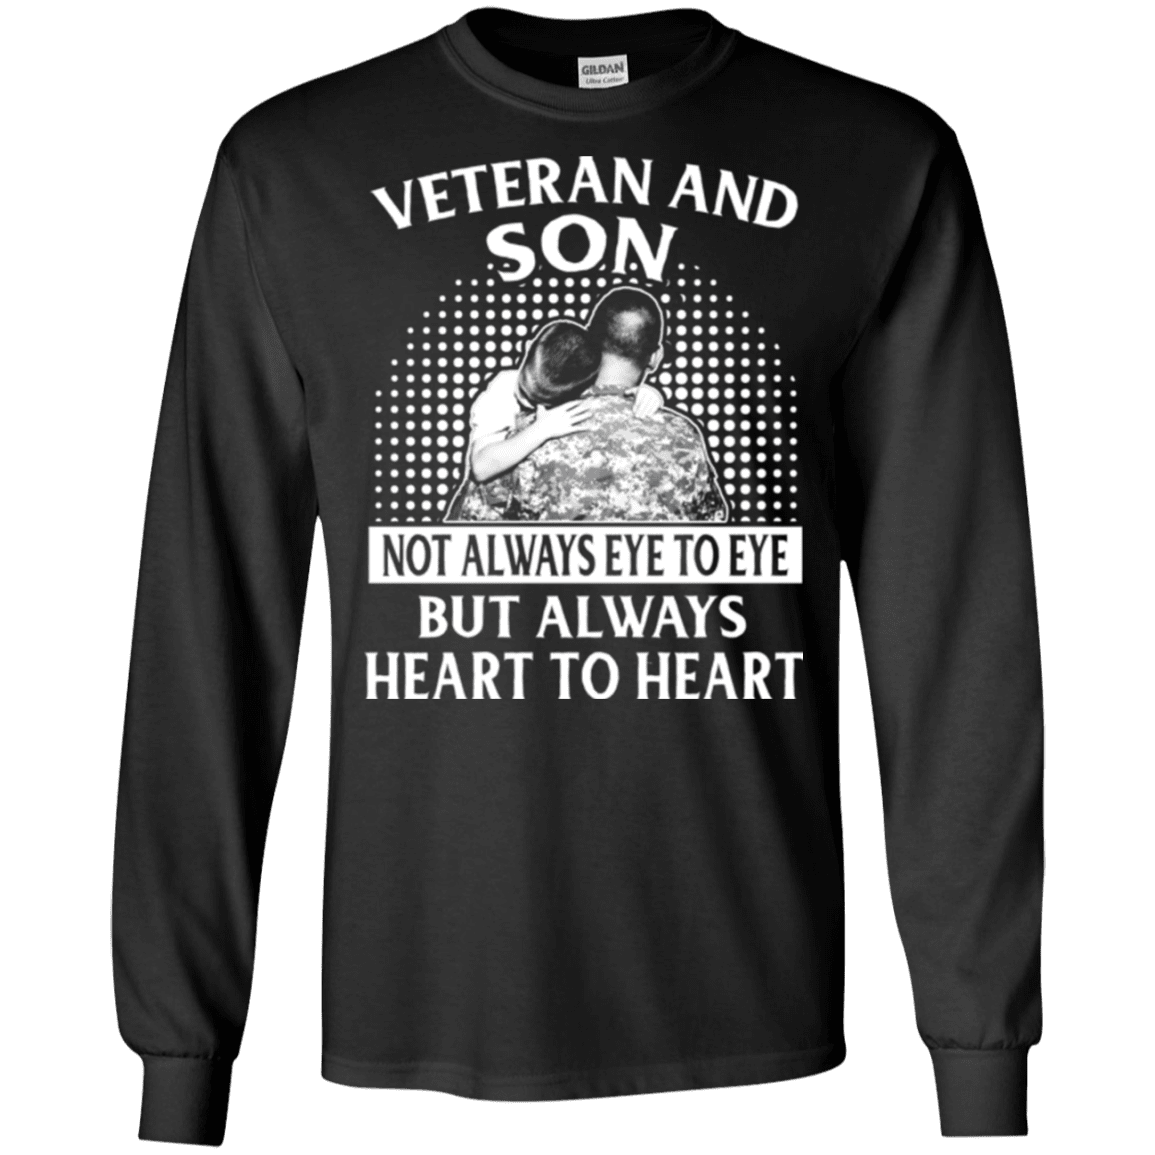 Military T-Shirt "VETERAN AND SON ALWAYS HEART TO HEART"-TShirt-General-Veterans Nation